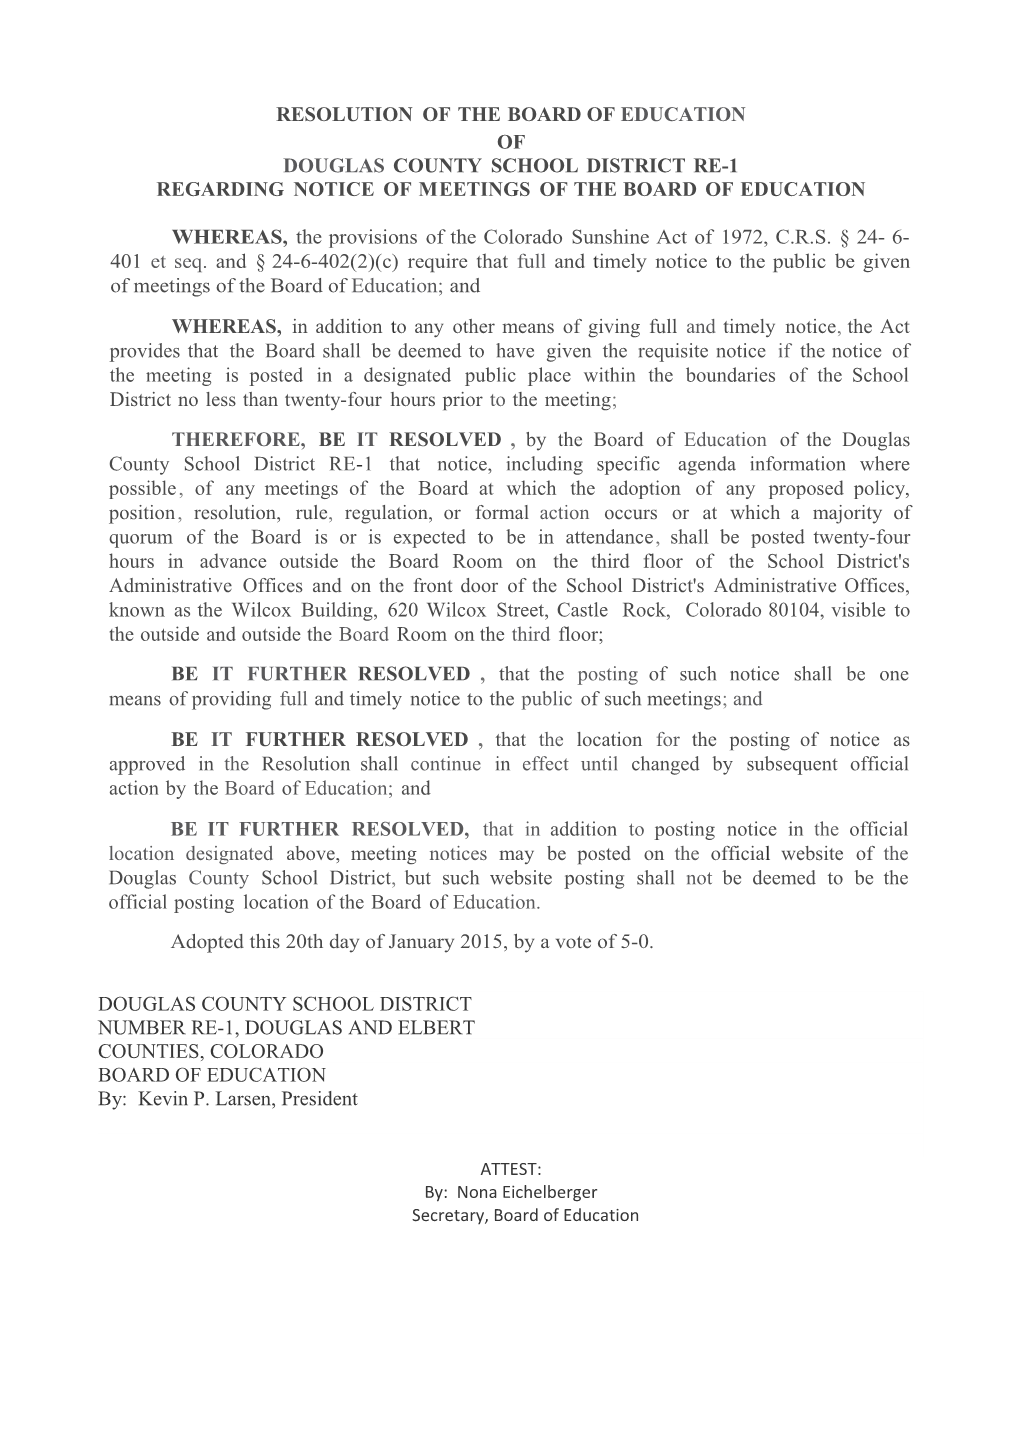 Resolution of the Board of Education